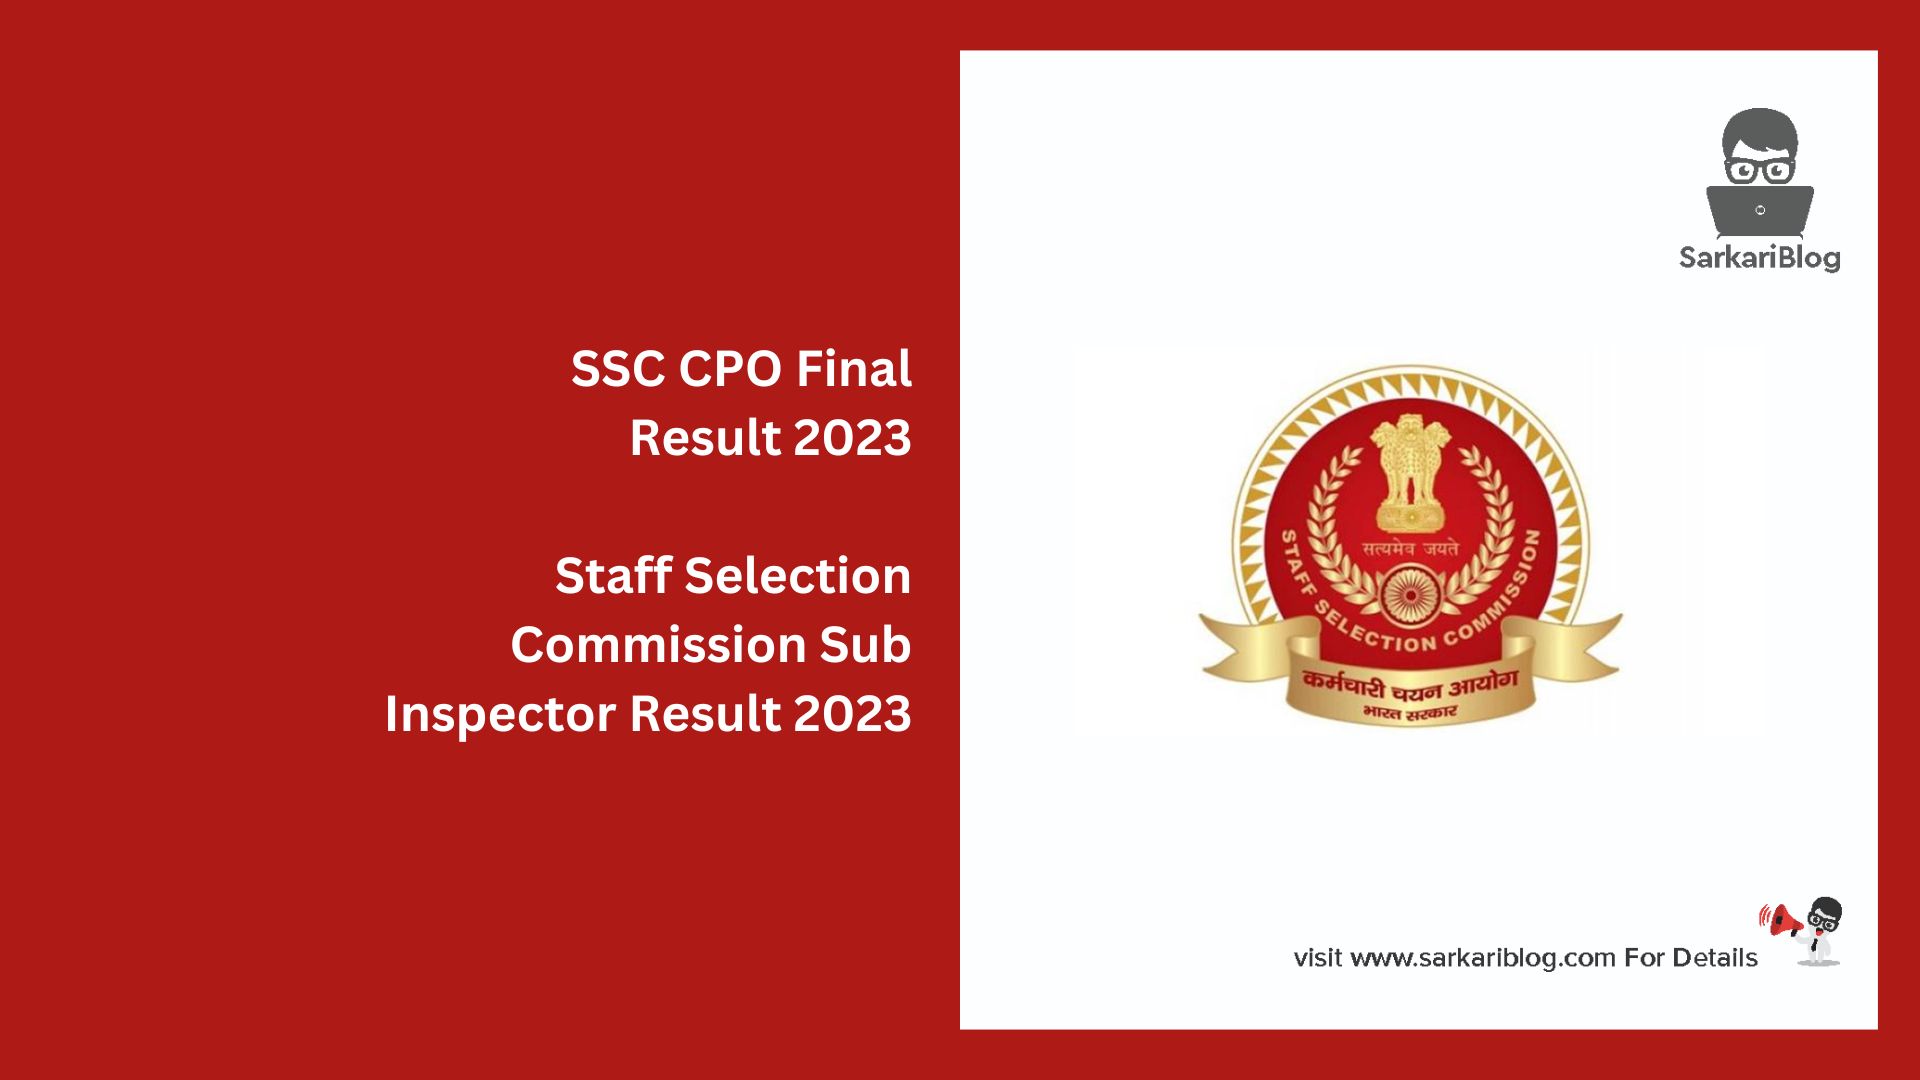 SSC CPO Final Result 2023